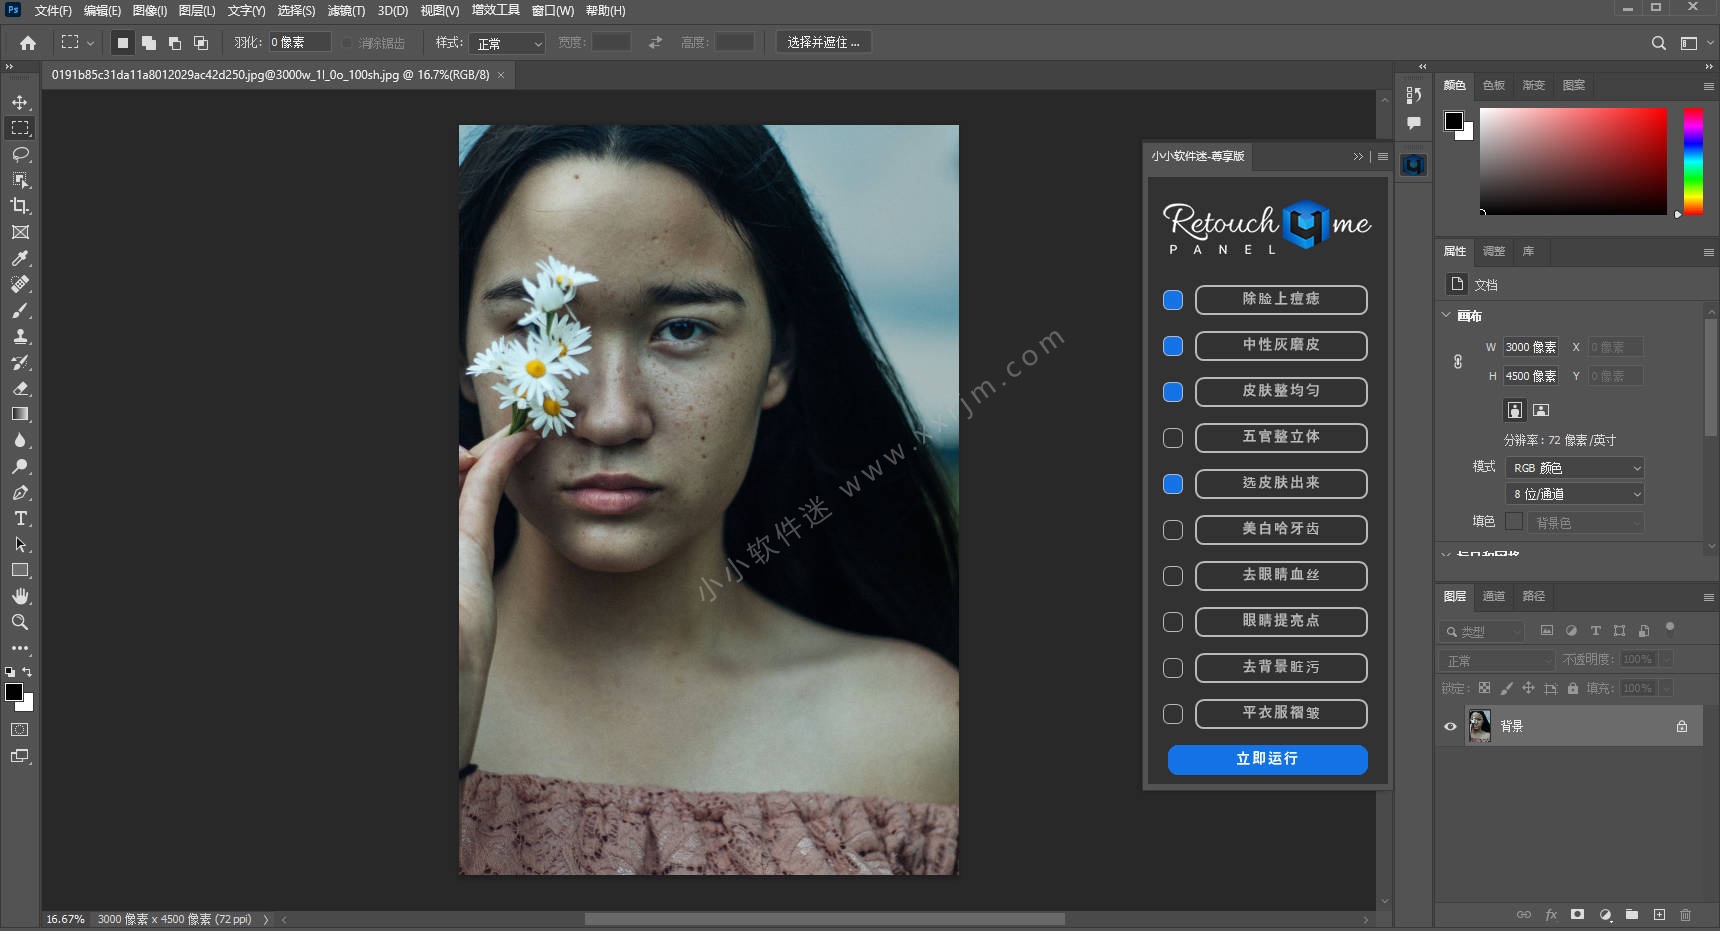 instal the last version for mac Retouch4me Heal 1.018 / Dodge / Skin Tone